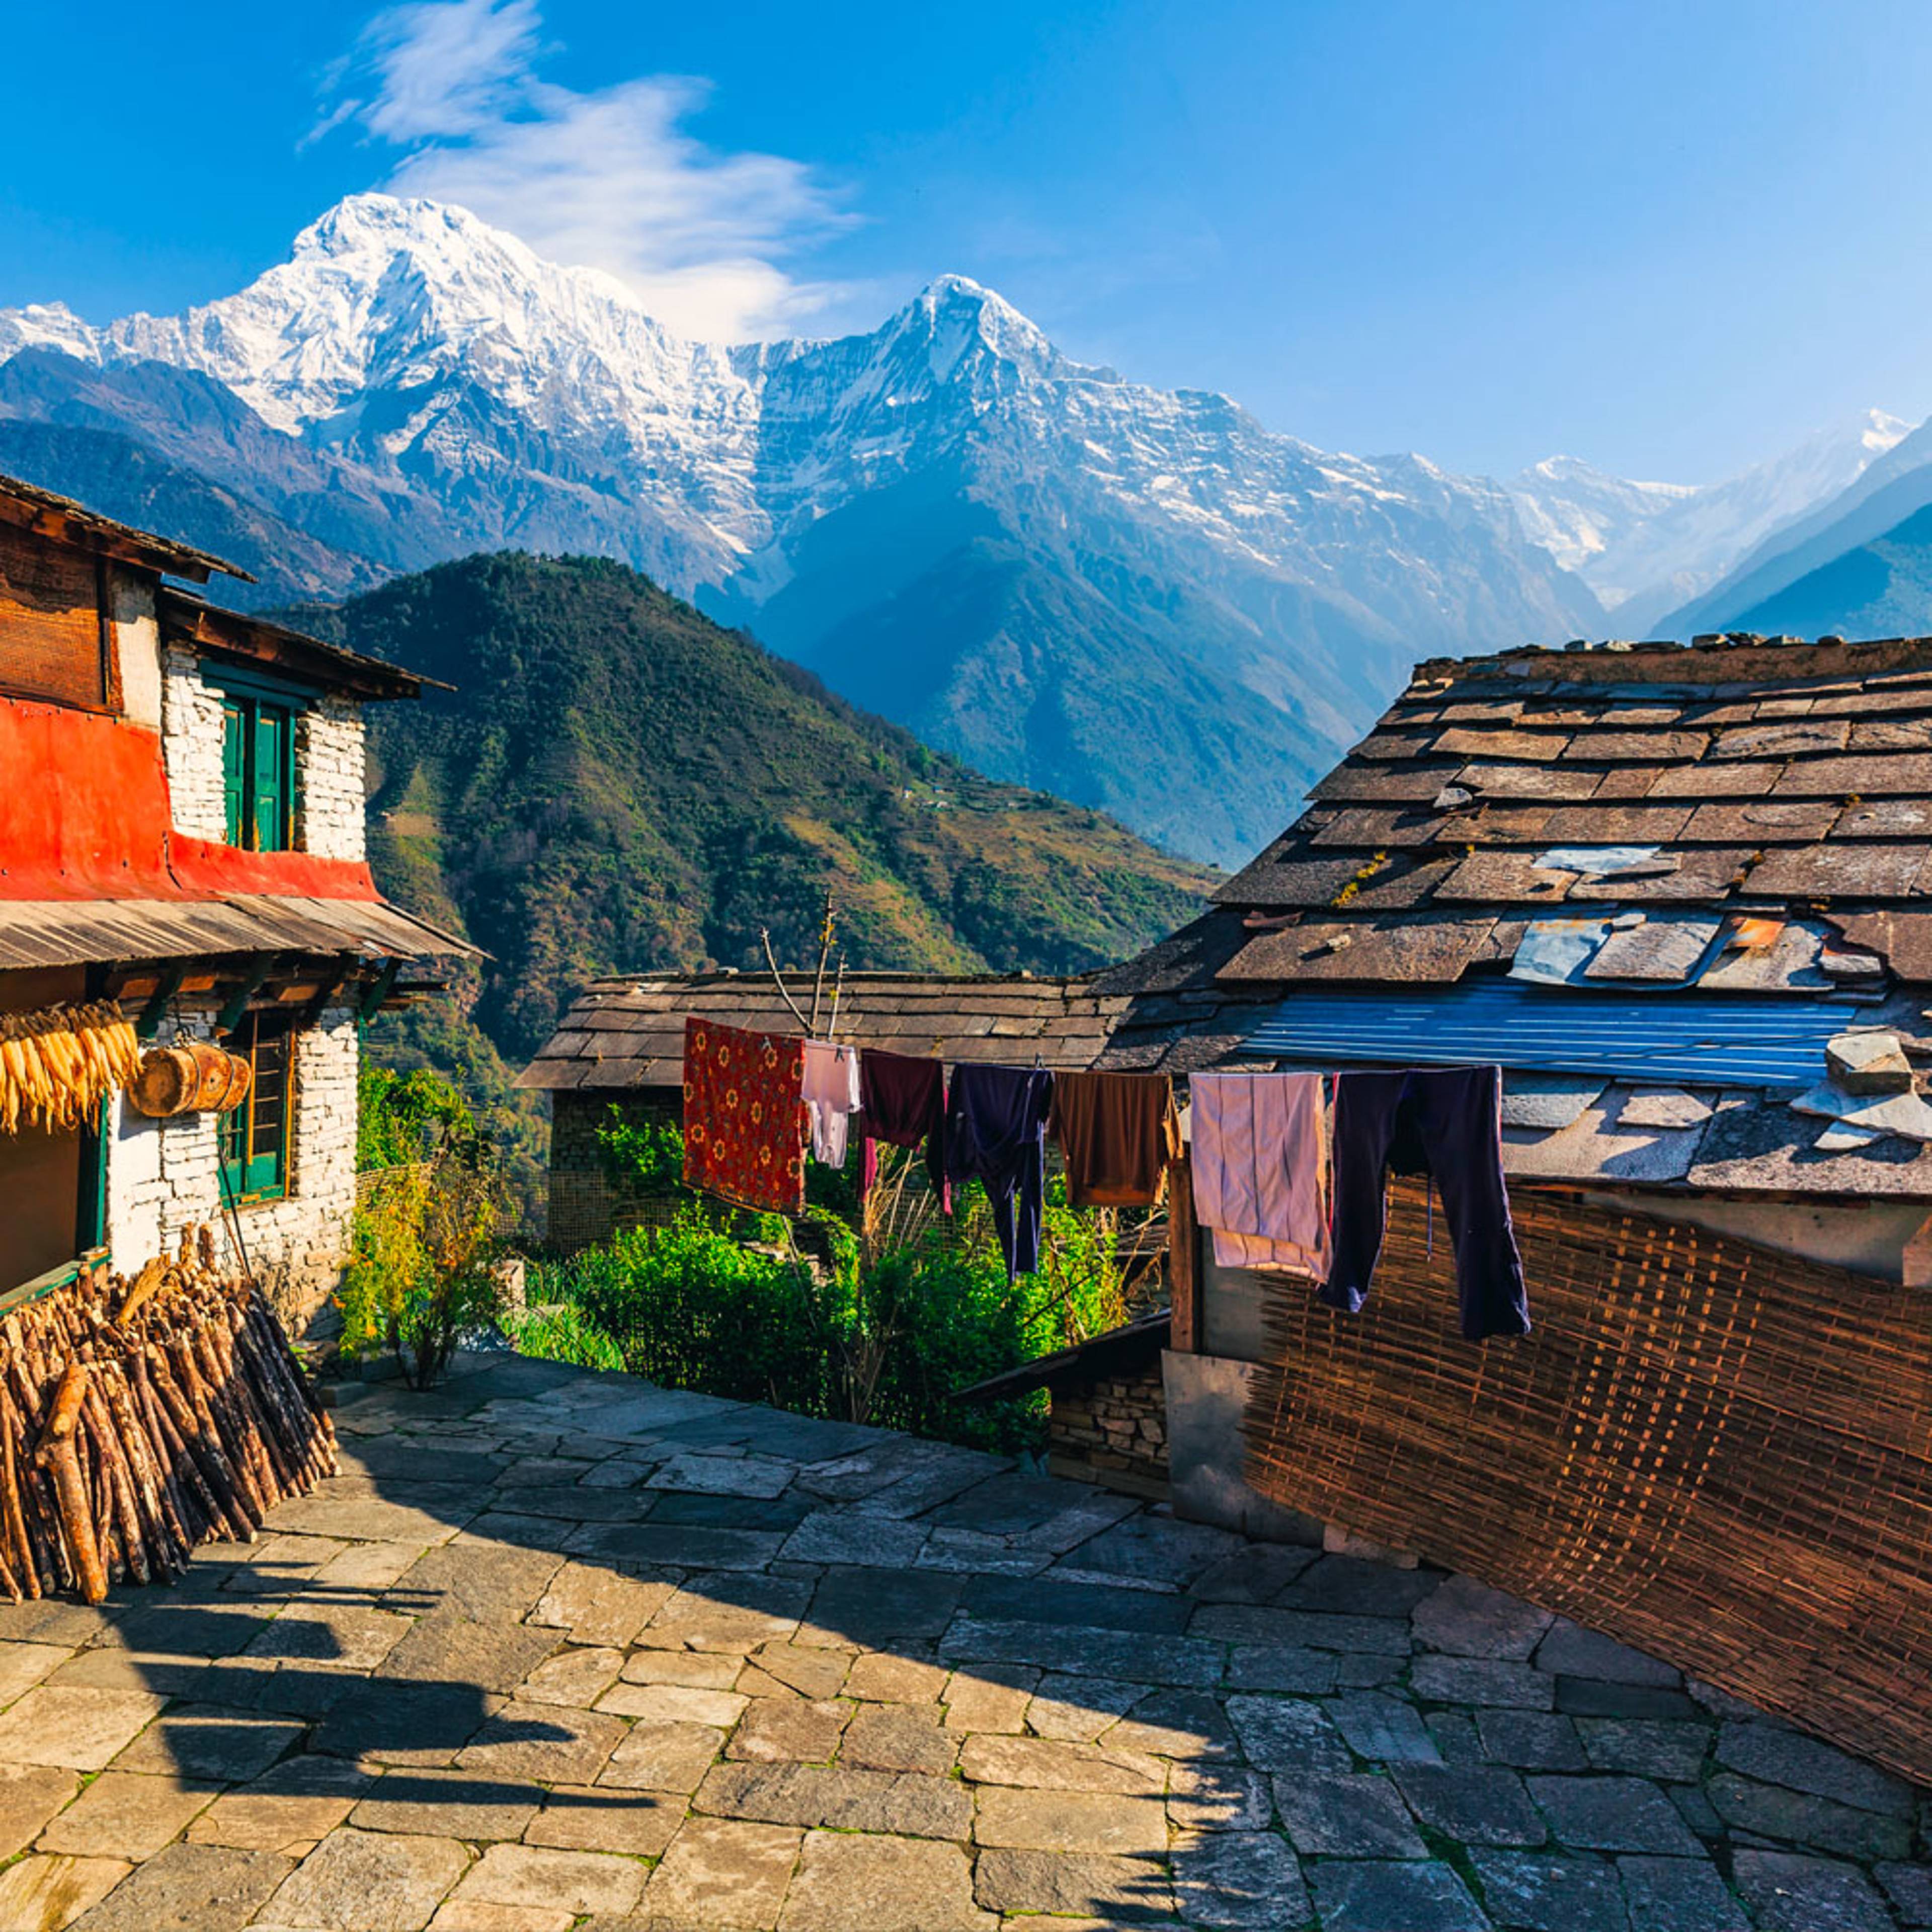 Design your perfect summer holiday in Nepal with a local expert